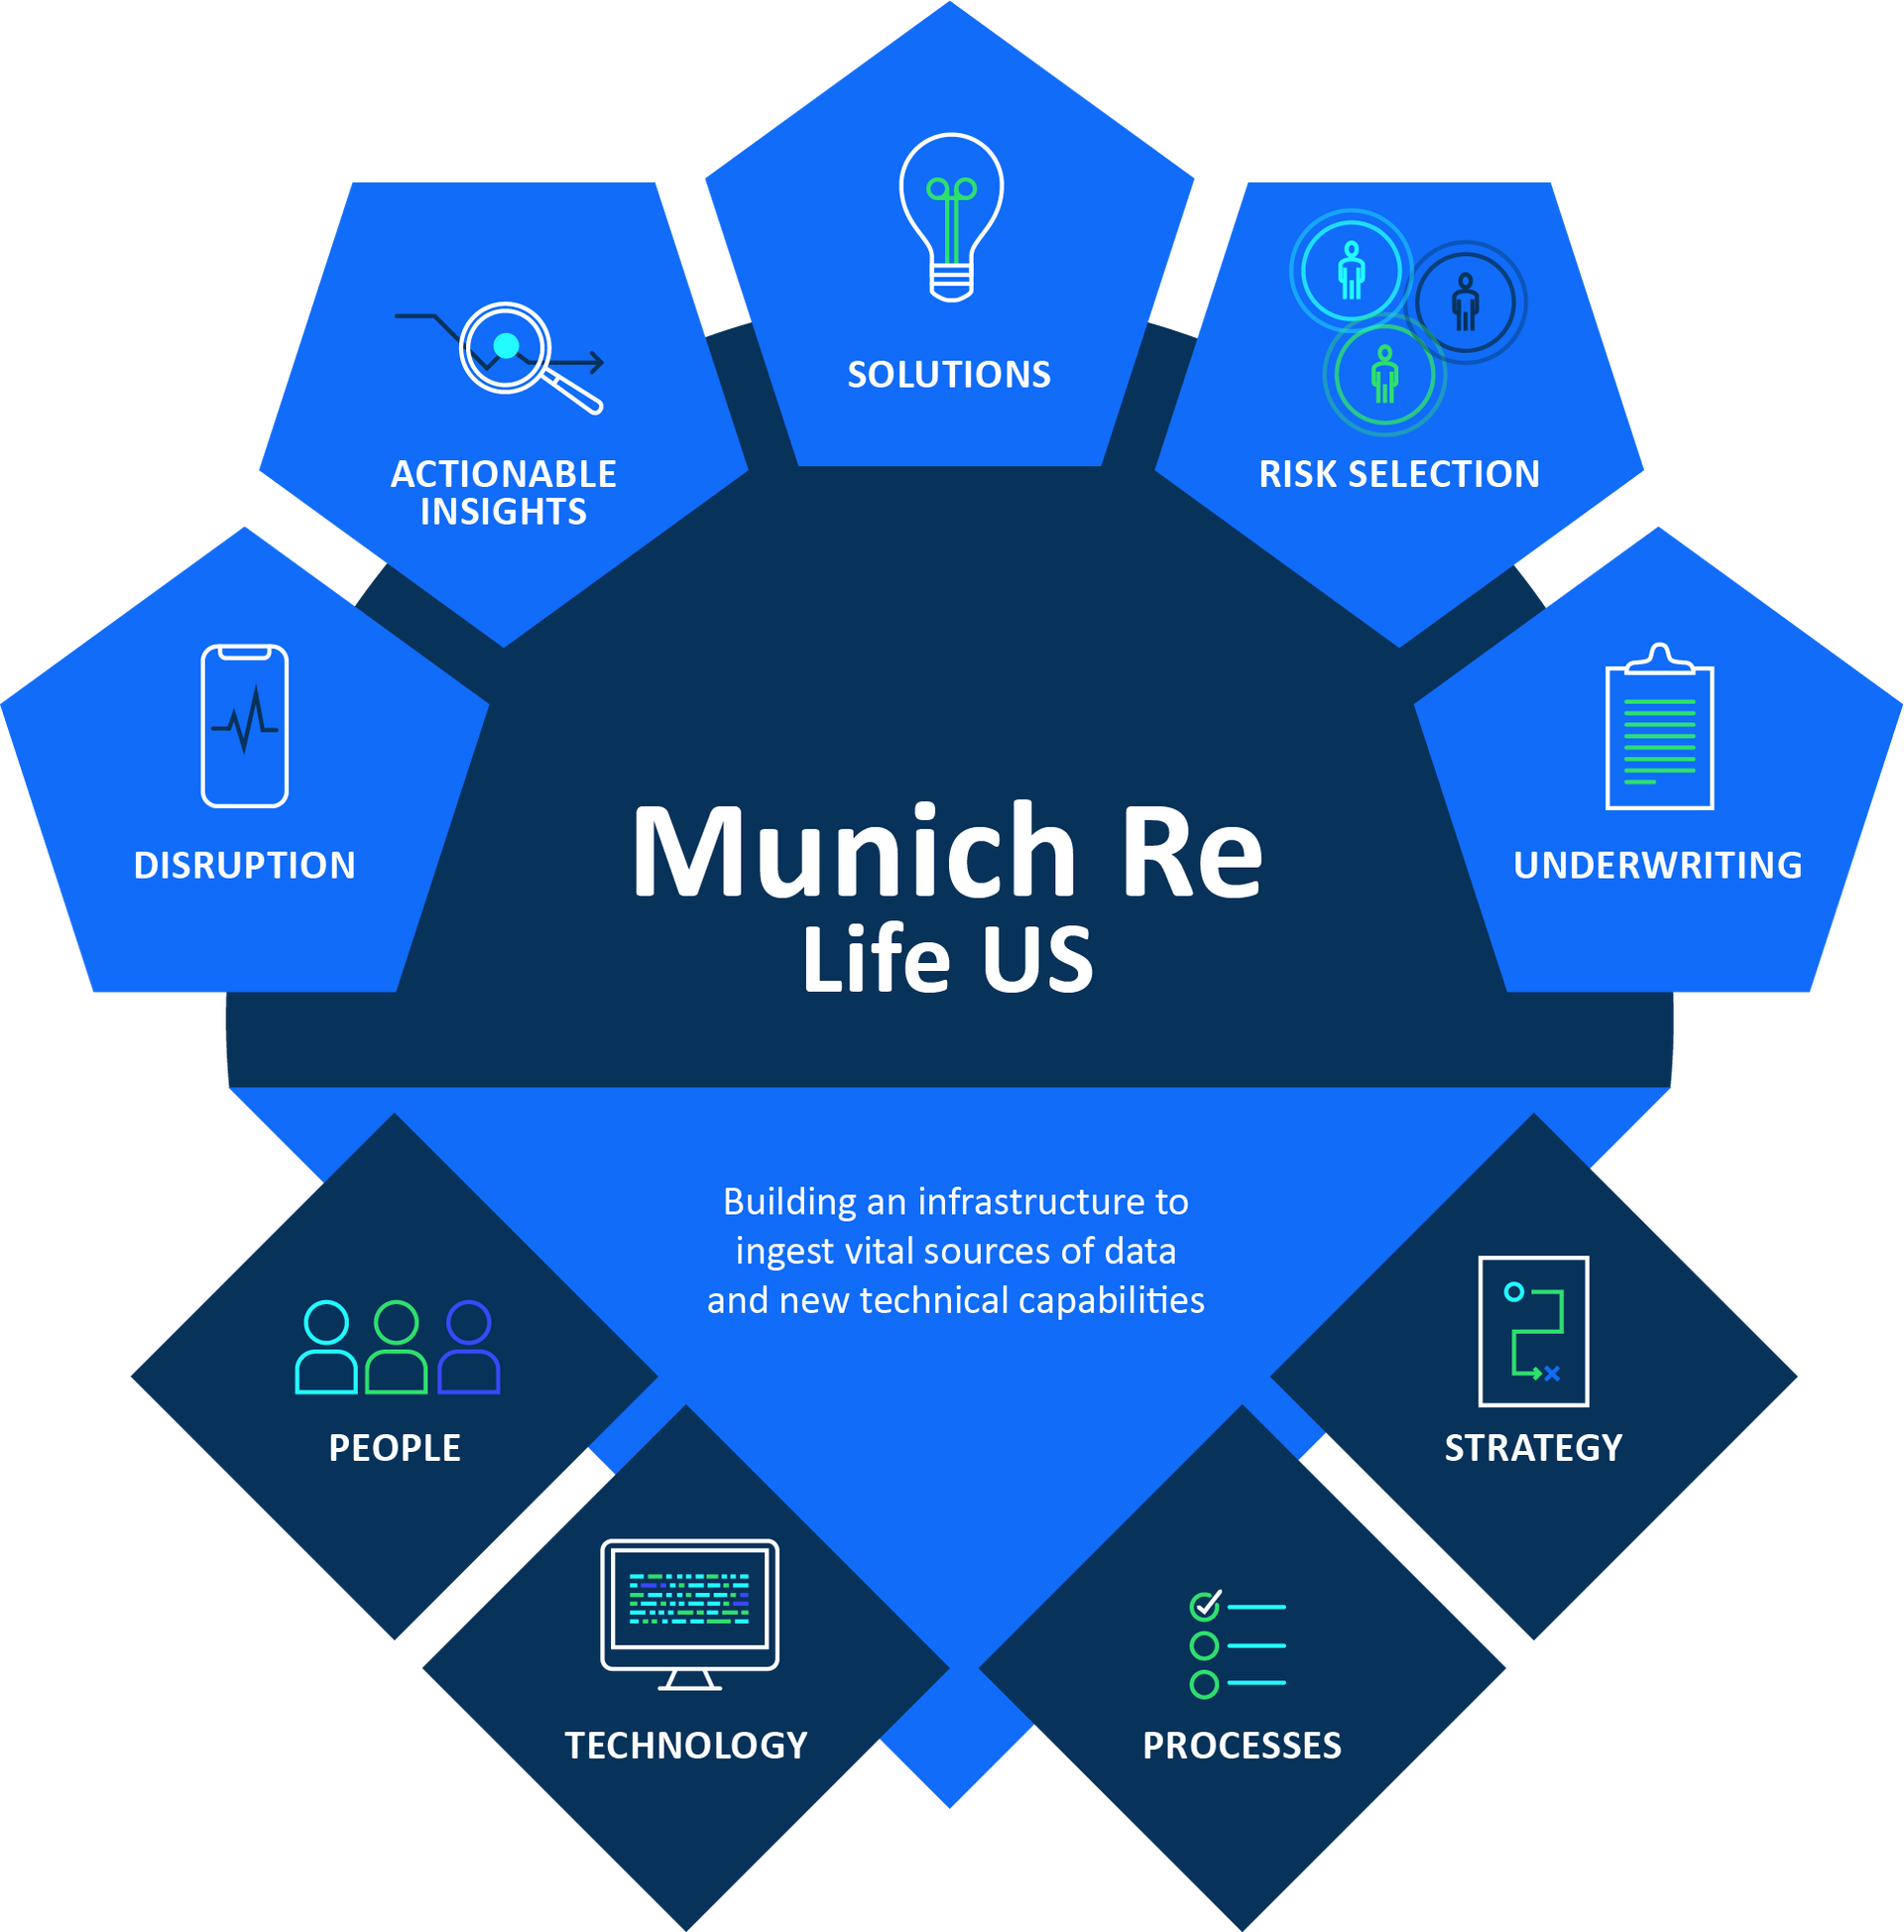 Munich Re Life Us info graphic showing company solutions